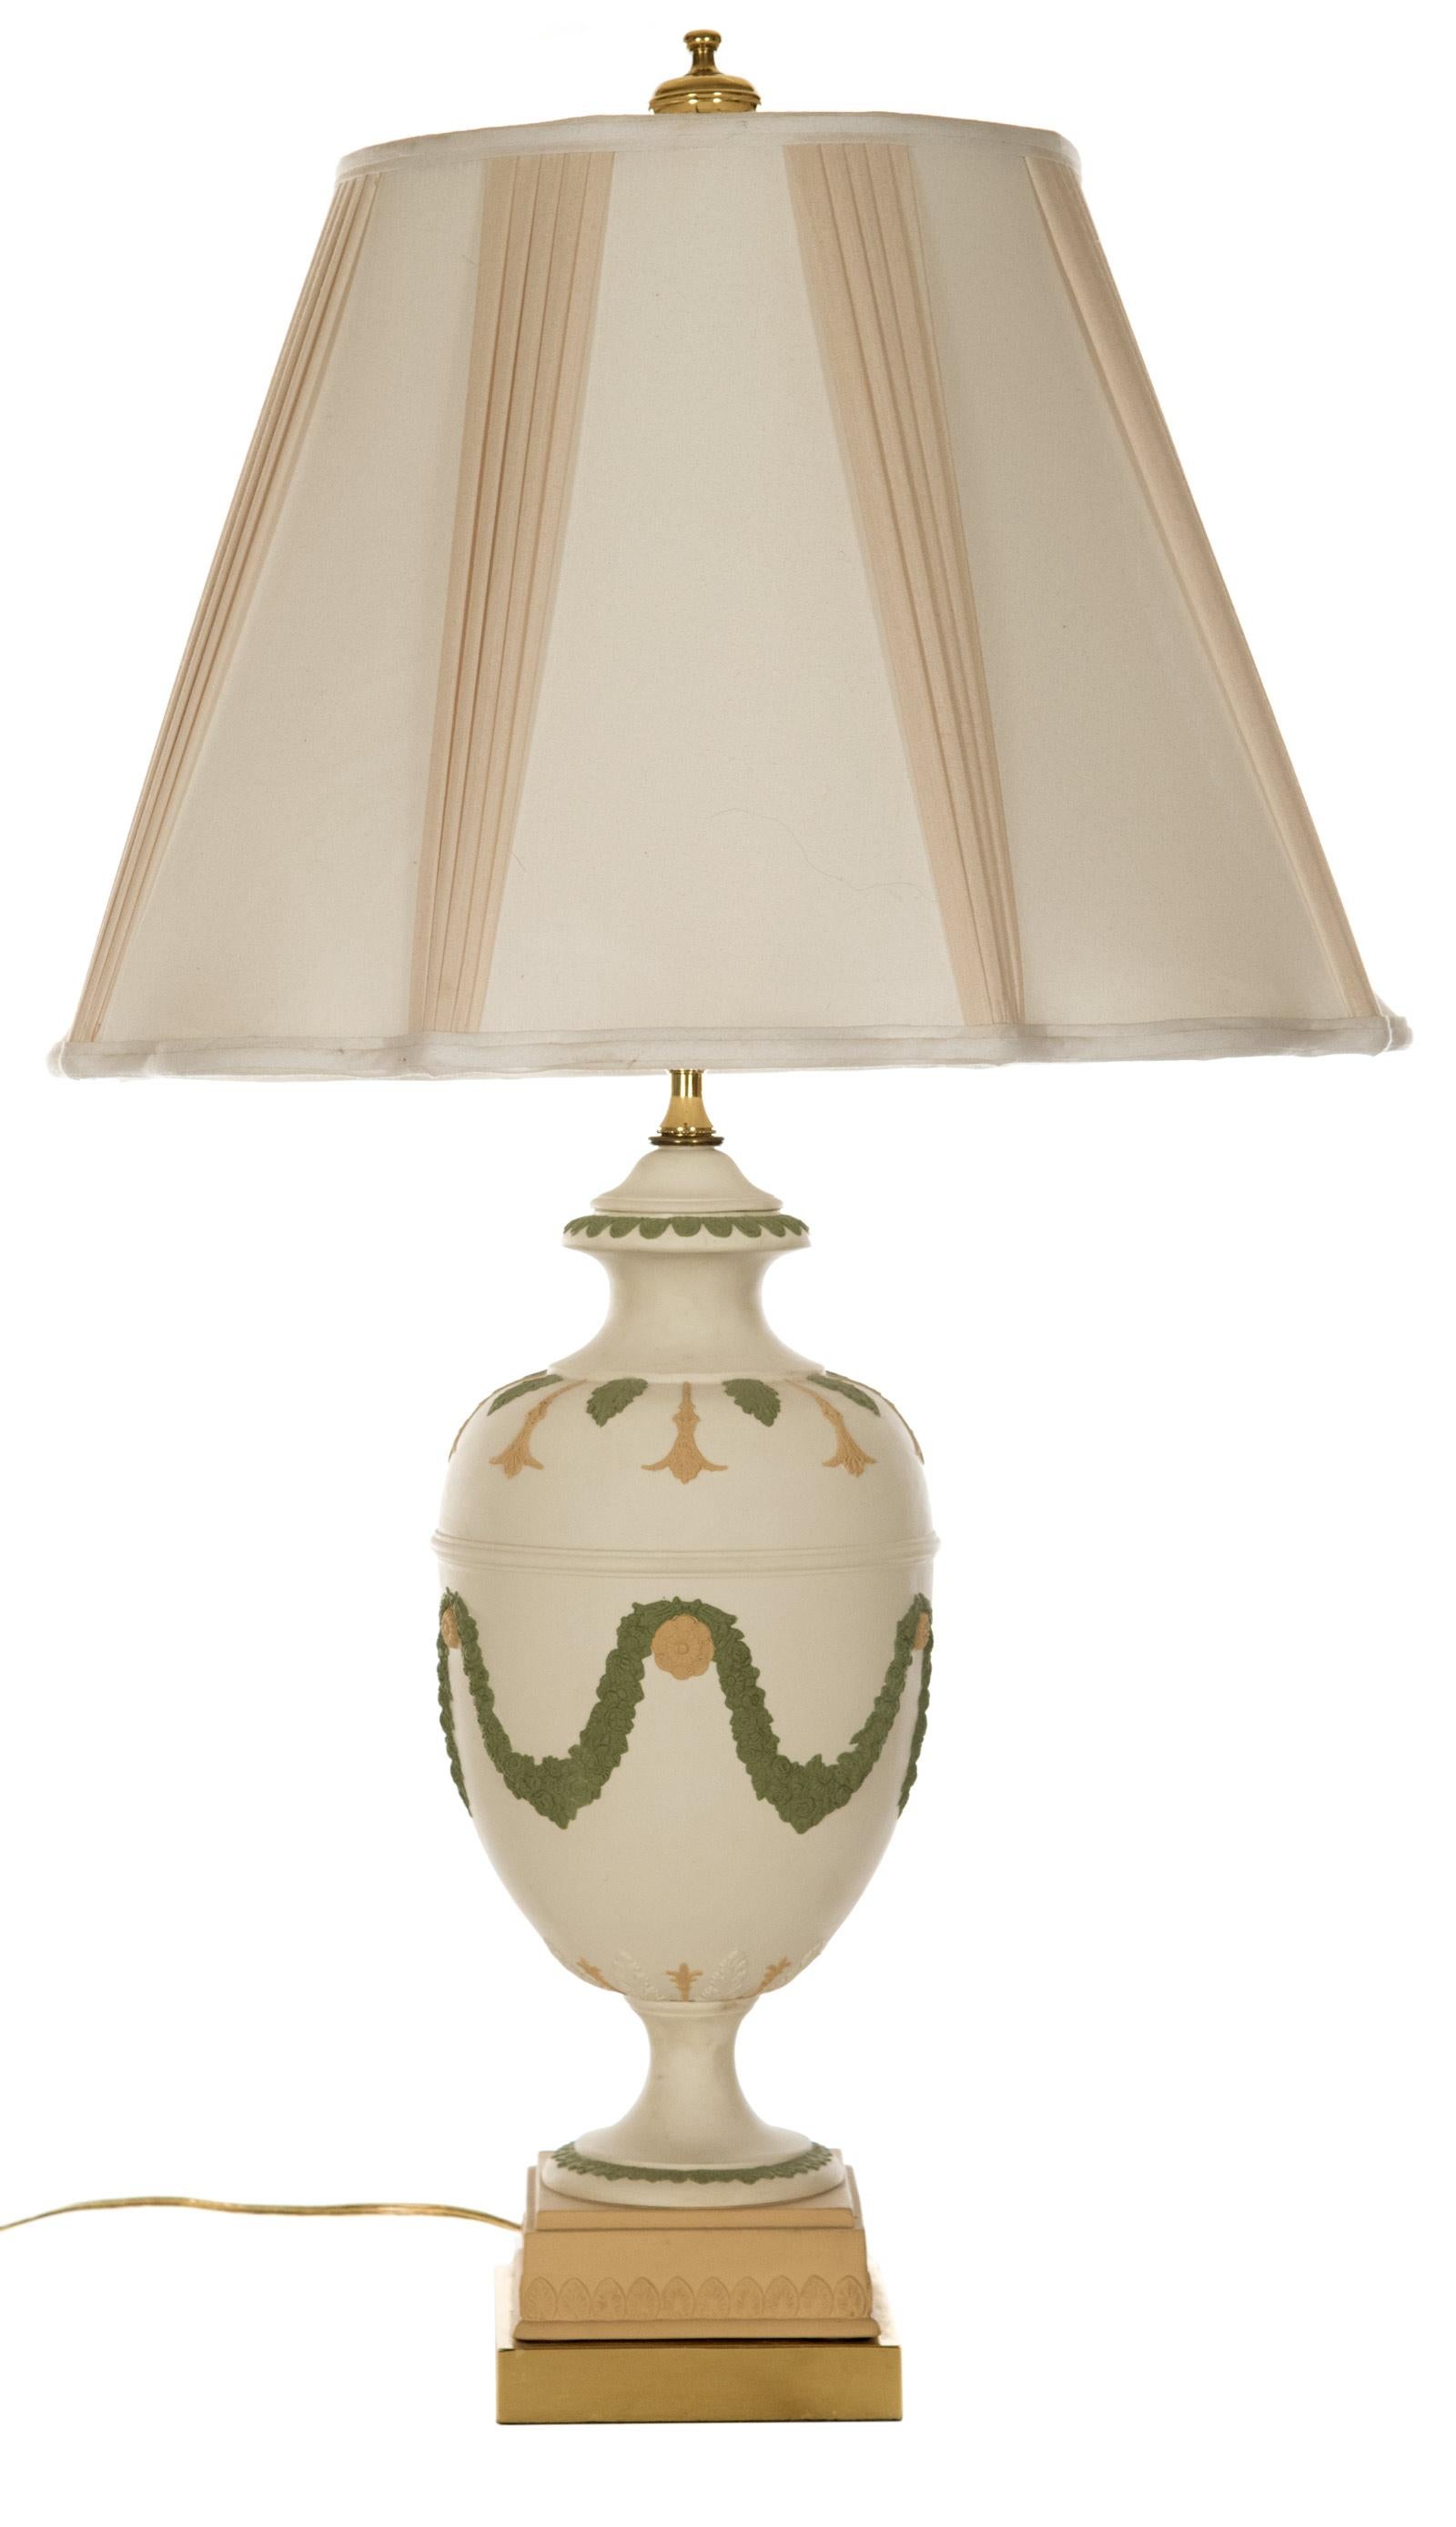 19th Century Neoclassical Style Ceramic Table Lamp with Garlands For Sale